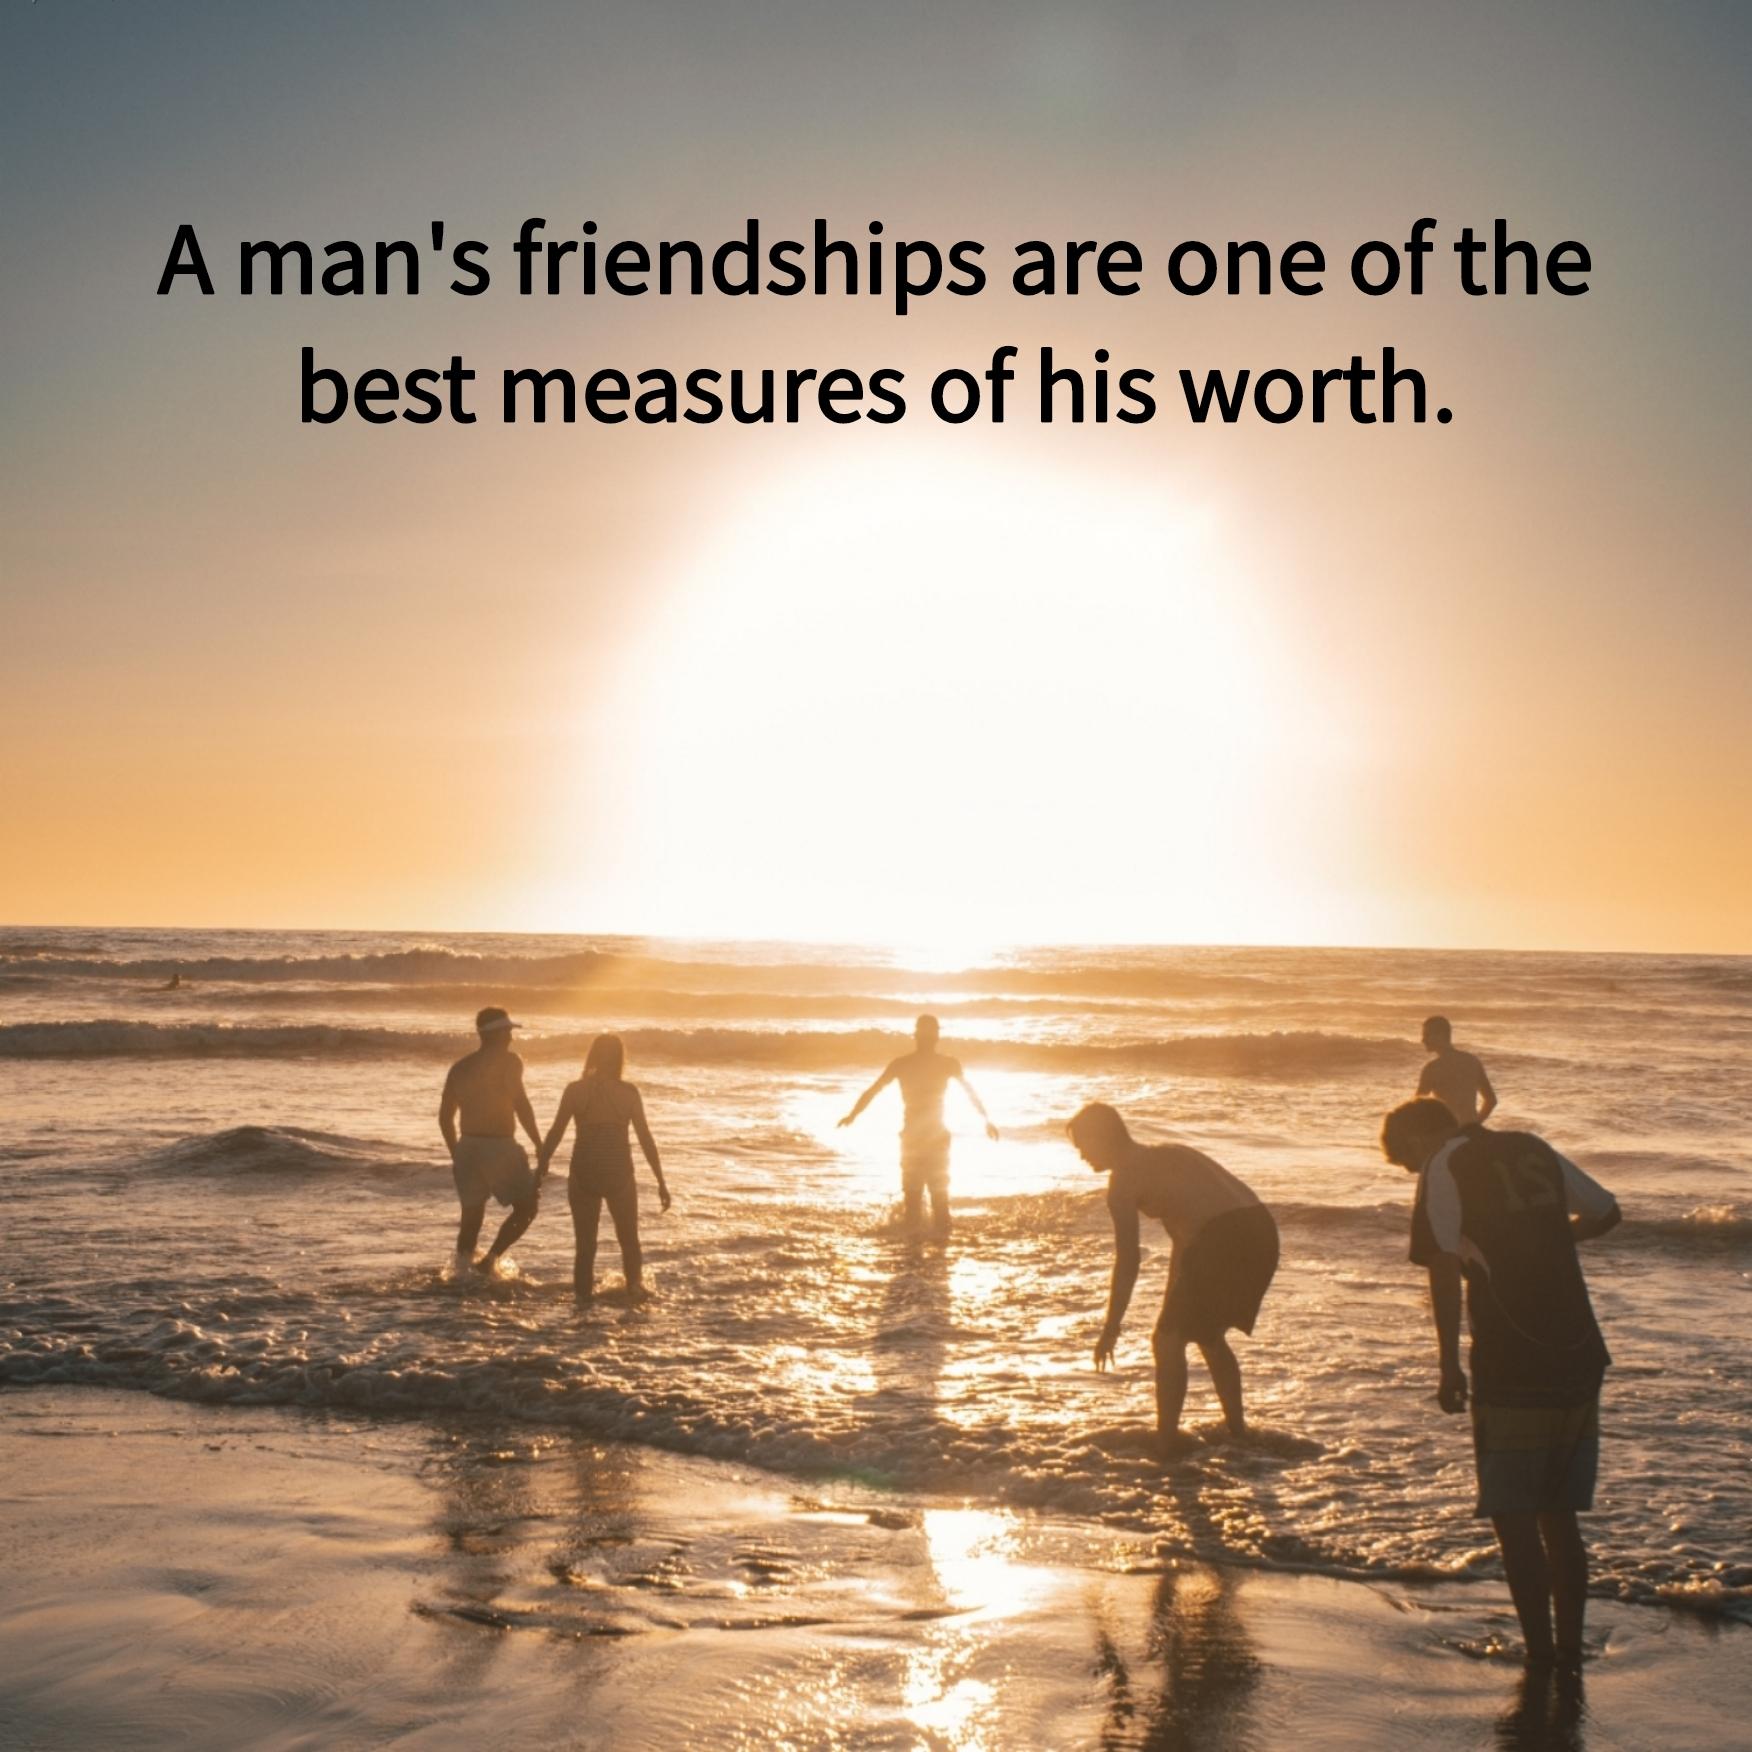 A man's friendships are one of the best measures of his worth